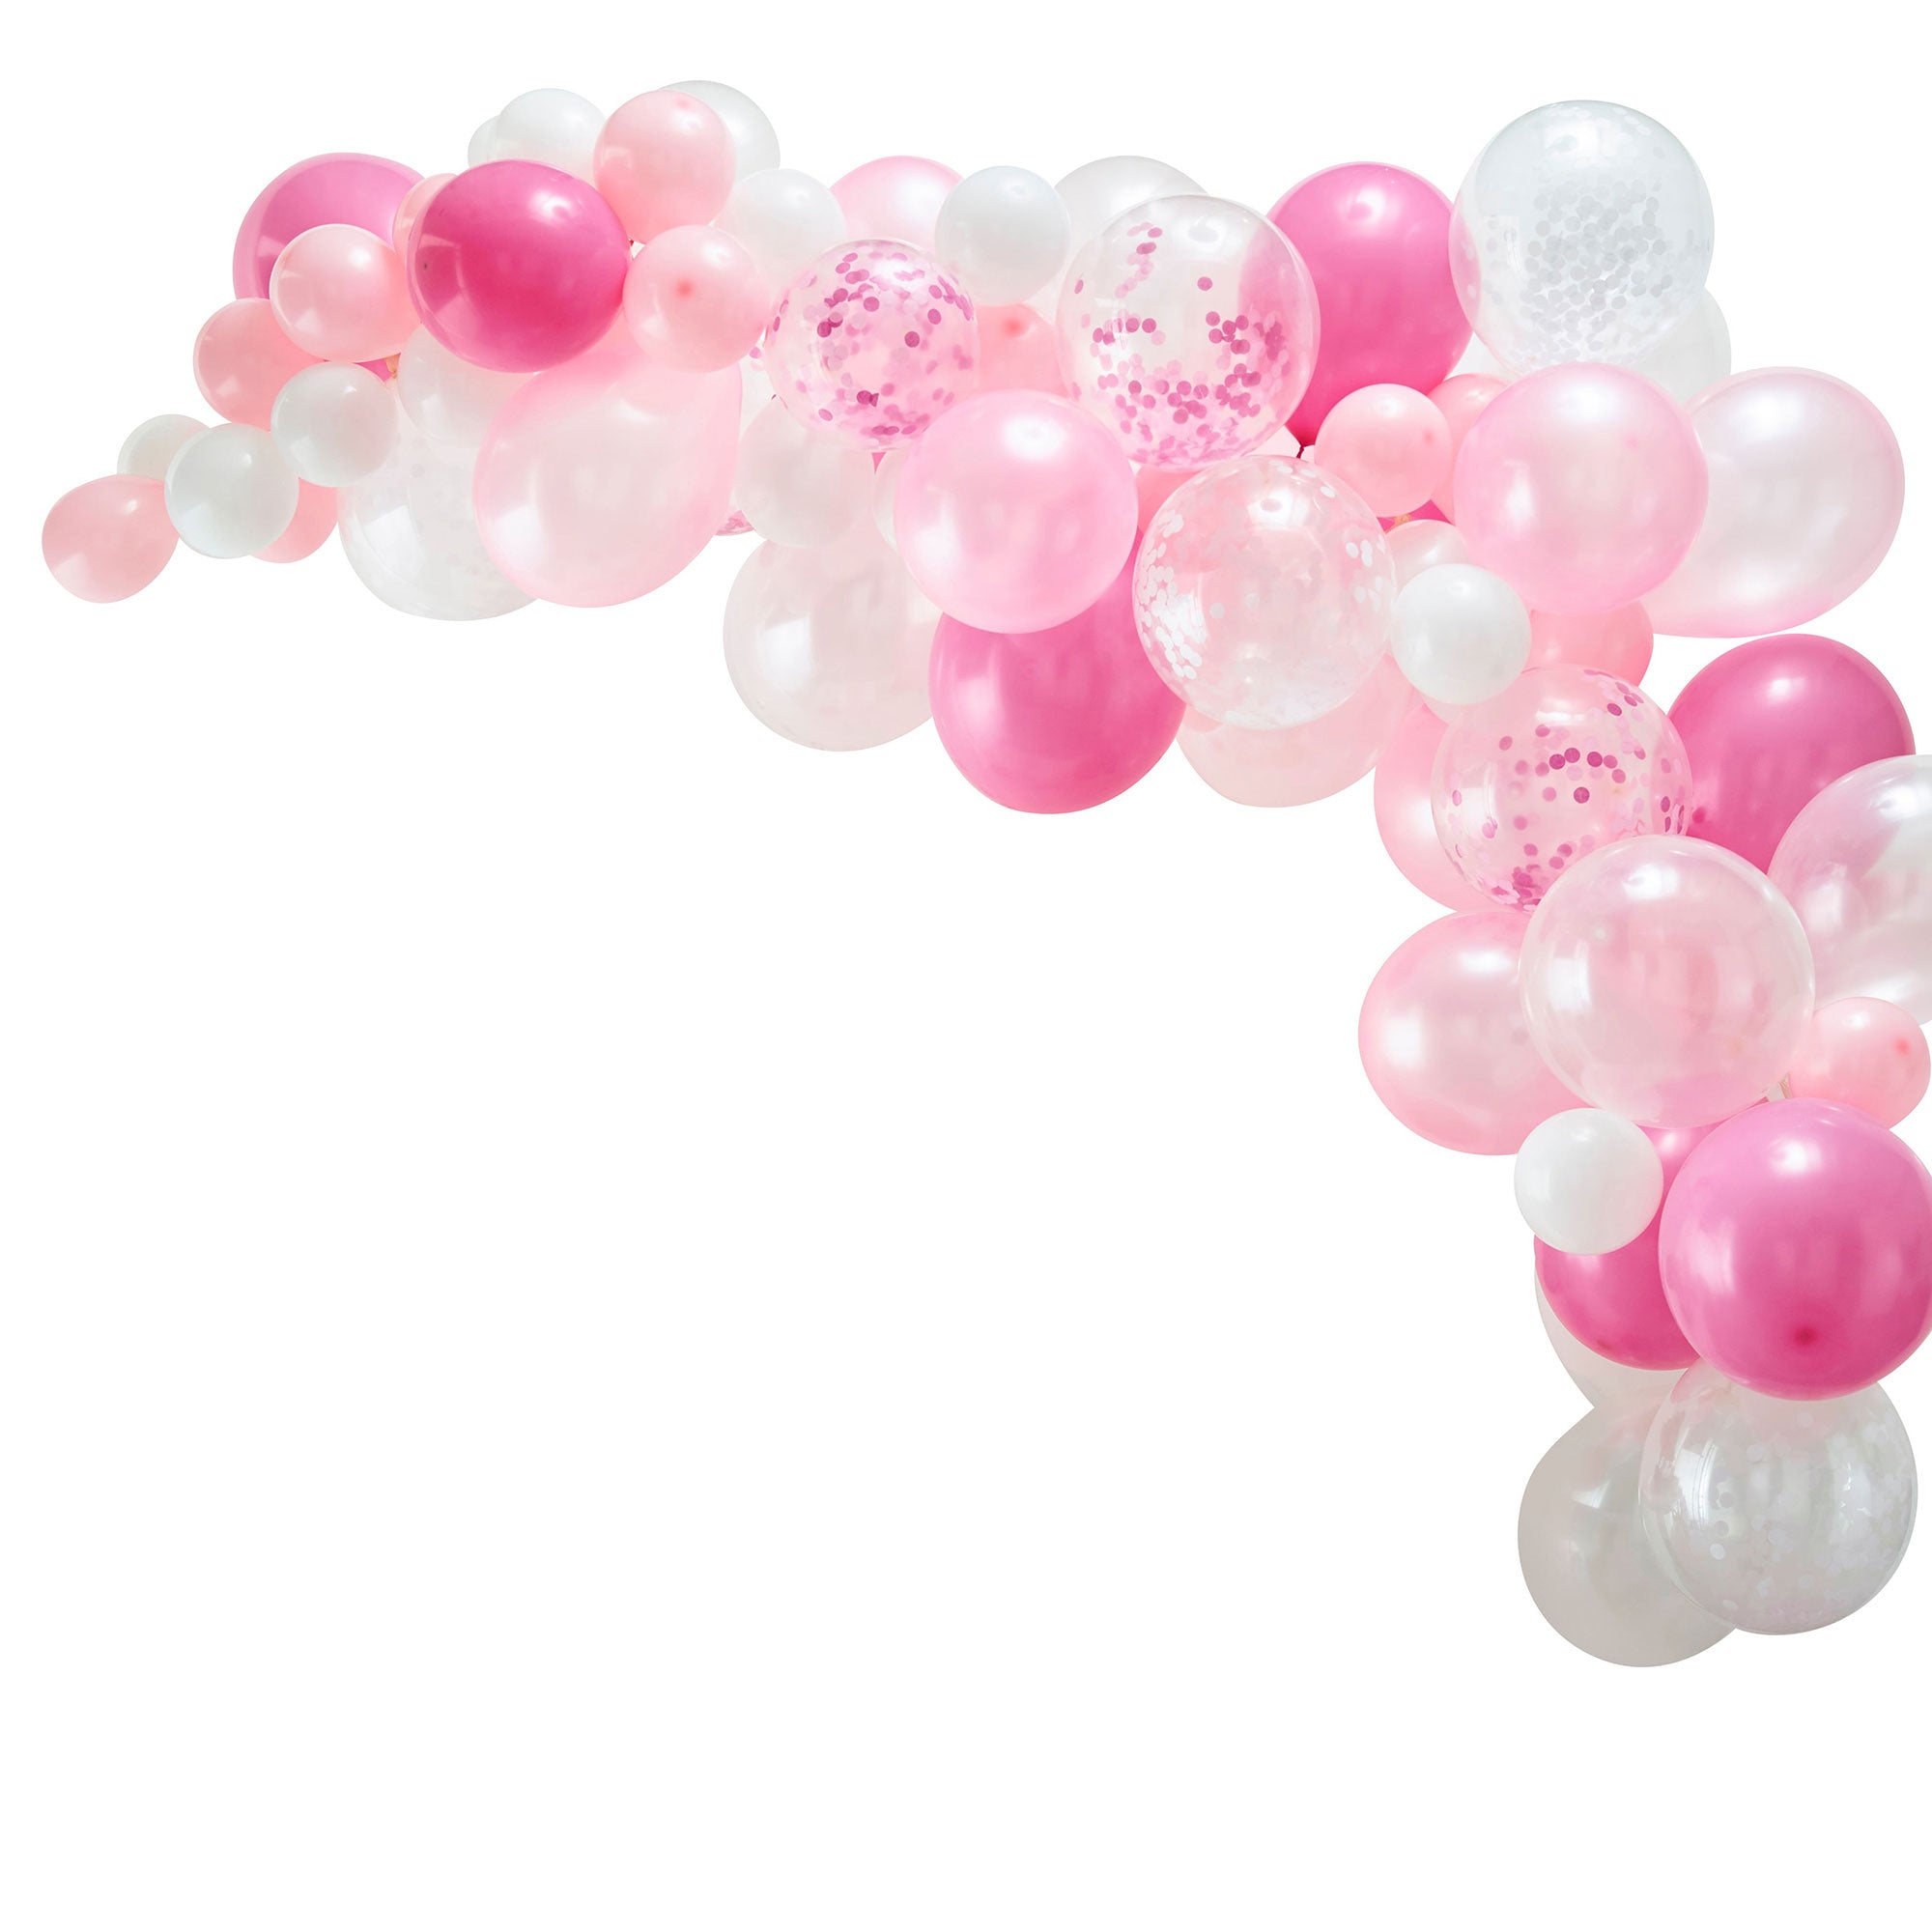 Balloon Arch Pastel With 80 Balloons Assemble at Home